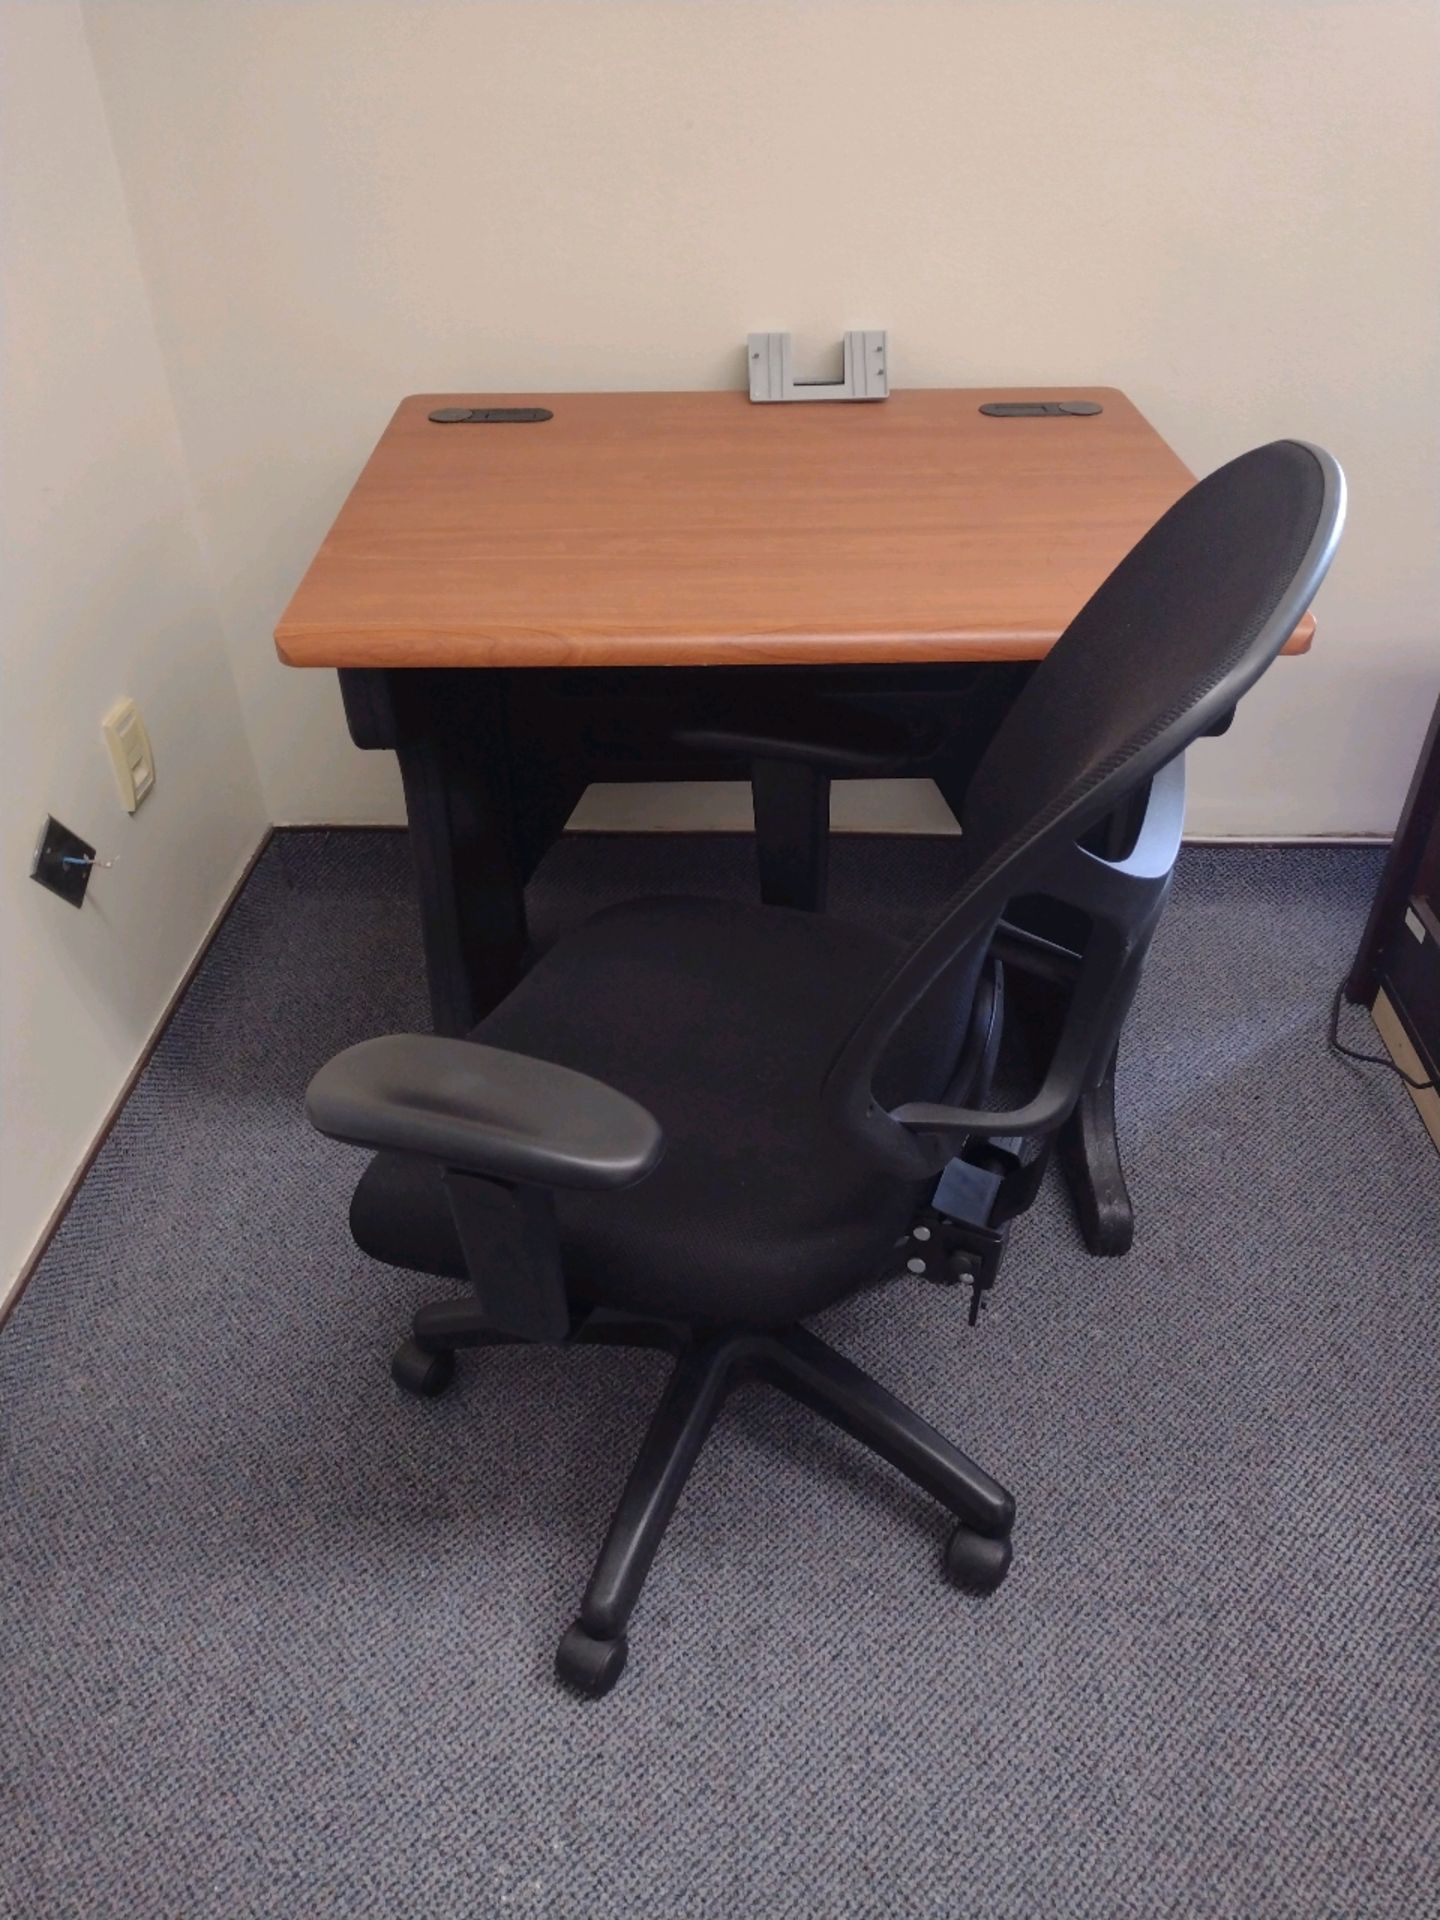 OFFICE TO INCLUDE: 2-DESKS, SIDE TABLE, TASK CHAIR, BOOKCASE AND 2- MONITORS - Image 5 of 5